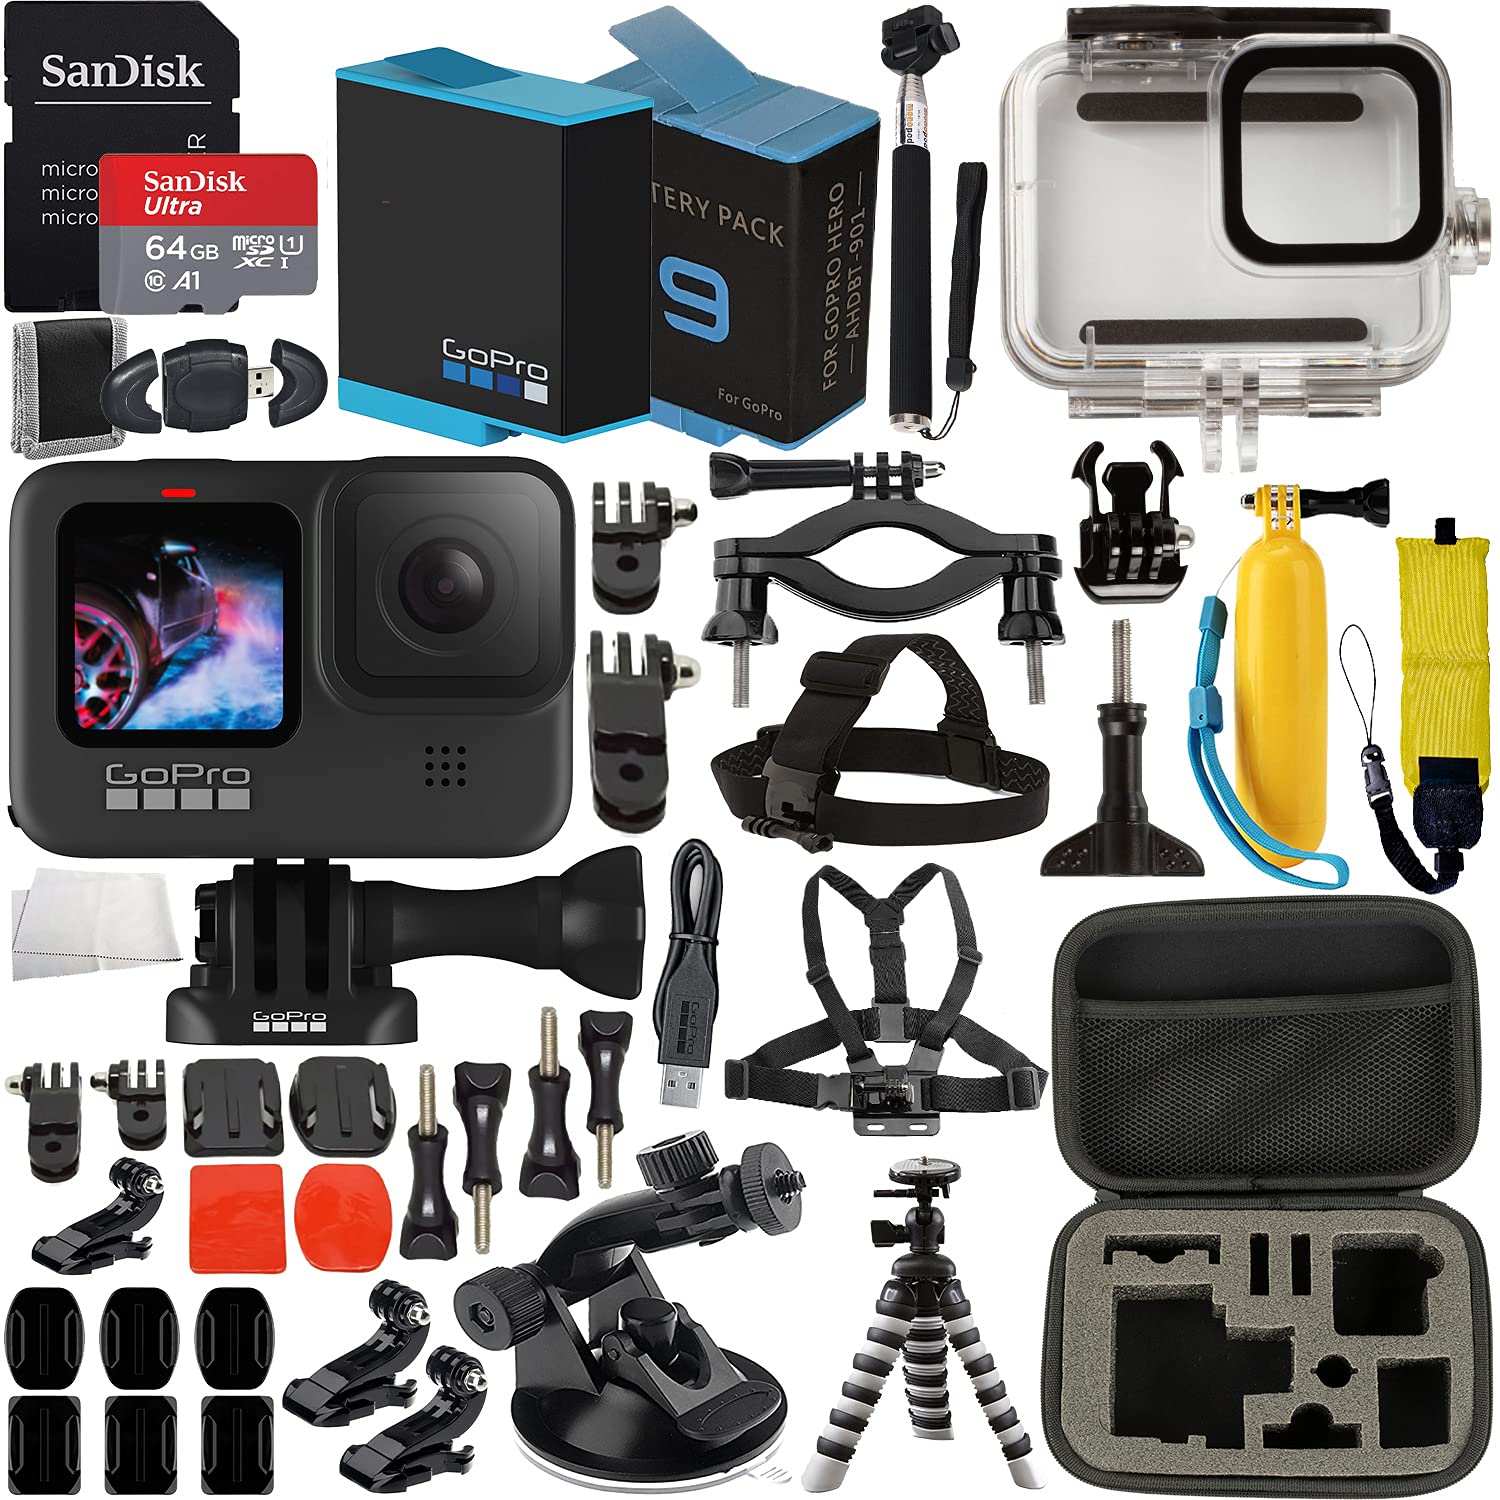 Das Beste dieser Saison GoPro HERO9 (Hero 9) Battery, Spare Includes: SanDisk Memory Carrying Action Bundle 64GB microSD with Underwater More Camera Ultra Case, Premium Housing, Accessory Much & Card, (Black)